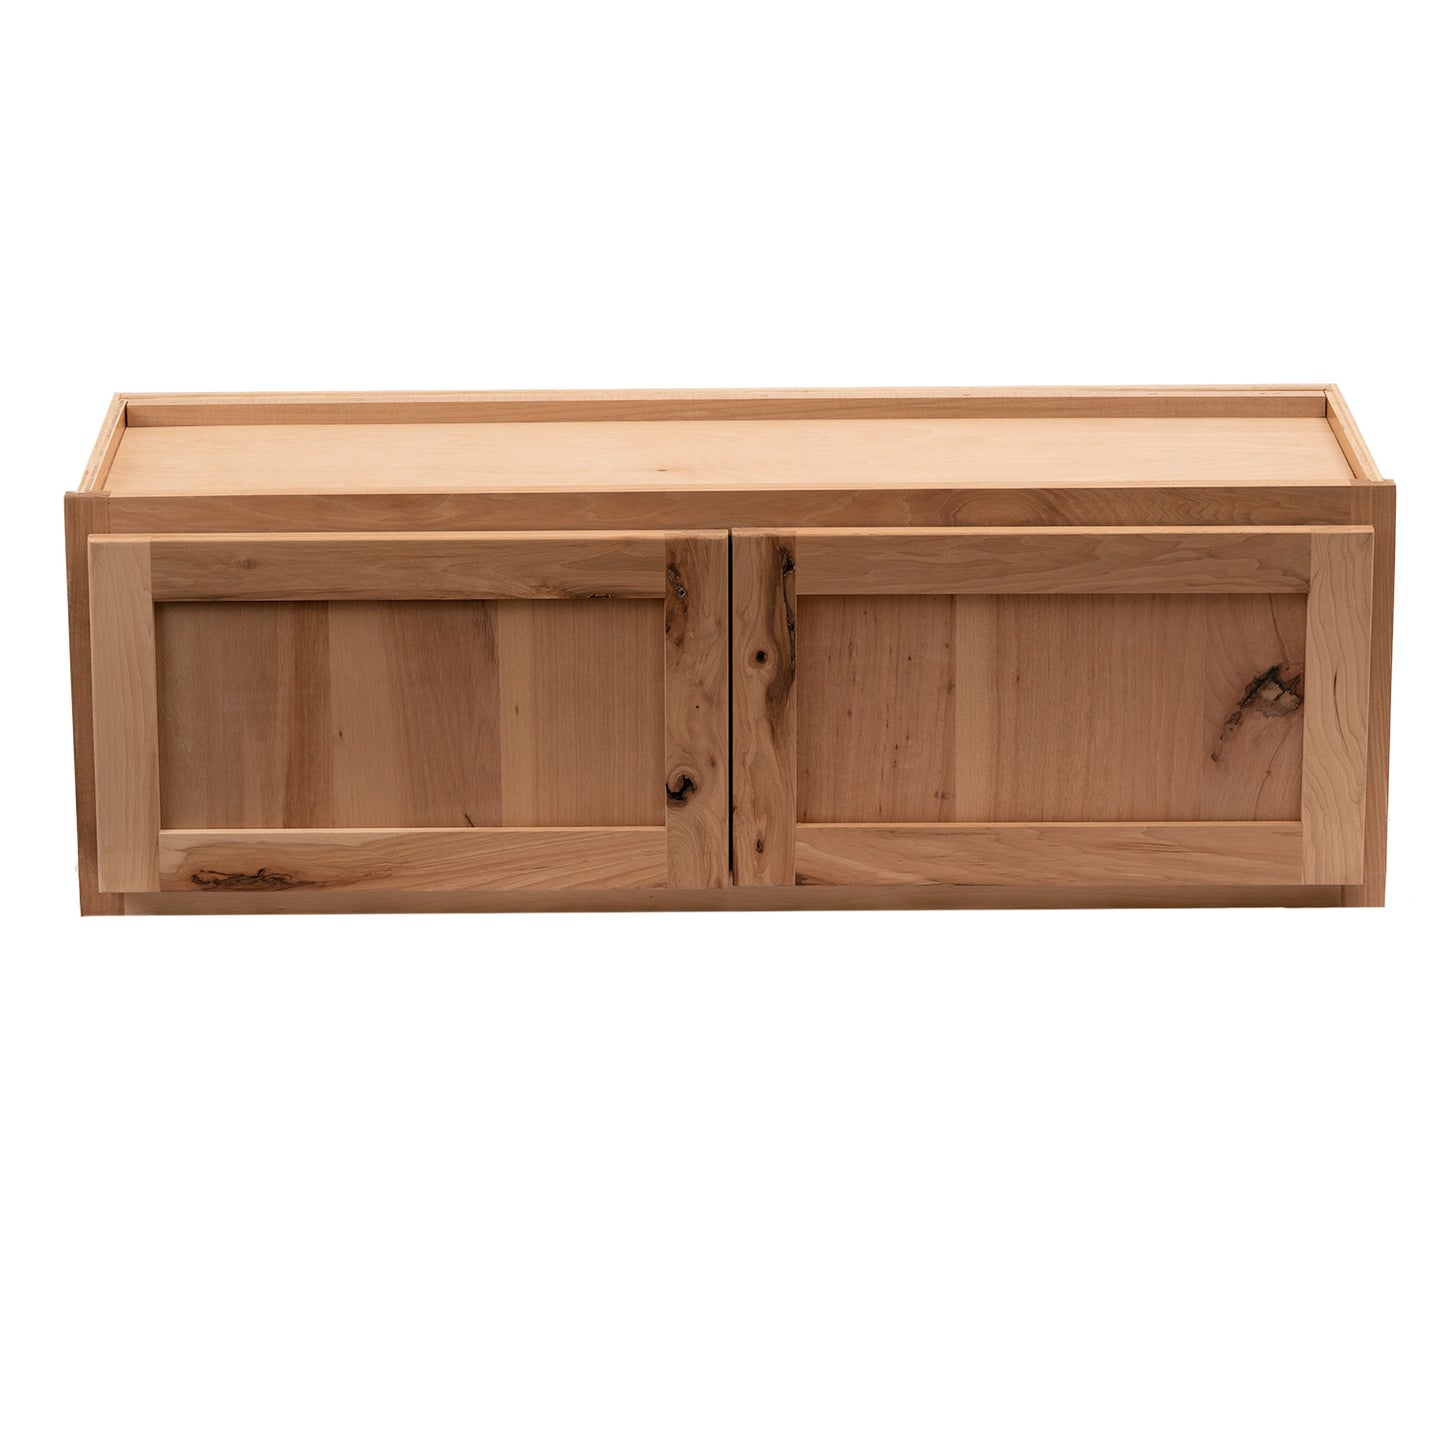 Quicklock RTA - Winding River Collection - Raw Hickory 30"Wx12"Hx12"D Microwave Wall cabinet